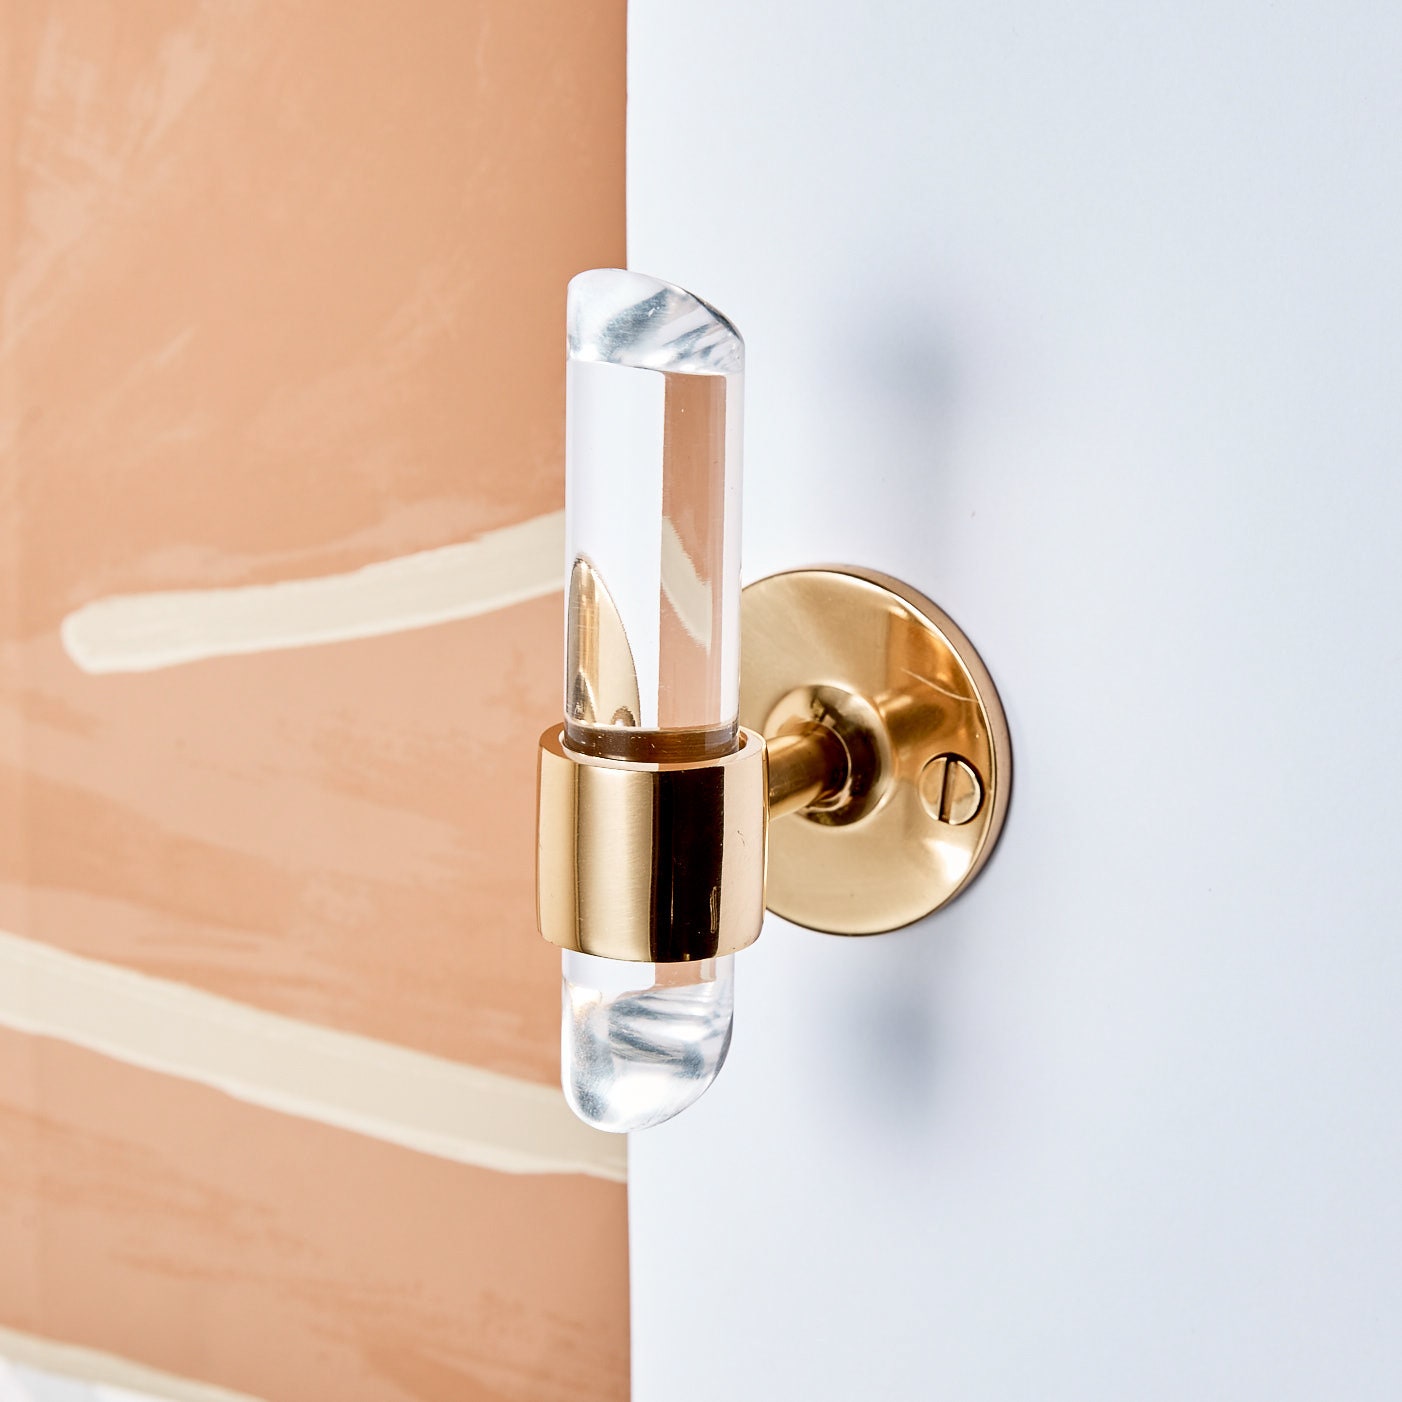 Polished Brass and Lucite Wall Hooks for Towels and Robes, Luxholdups  Lucite Bathroom Accessories, Storage and Organization Luxury Fixtures 